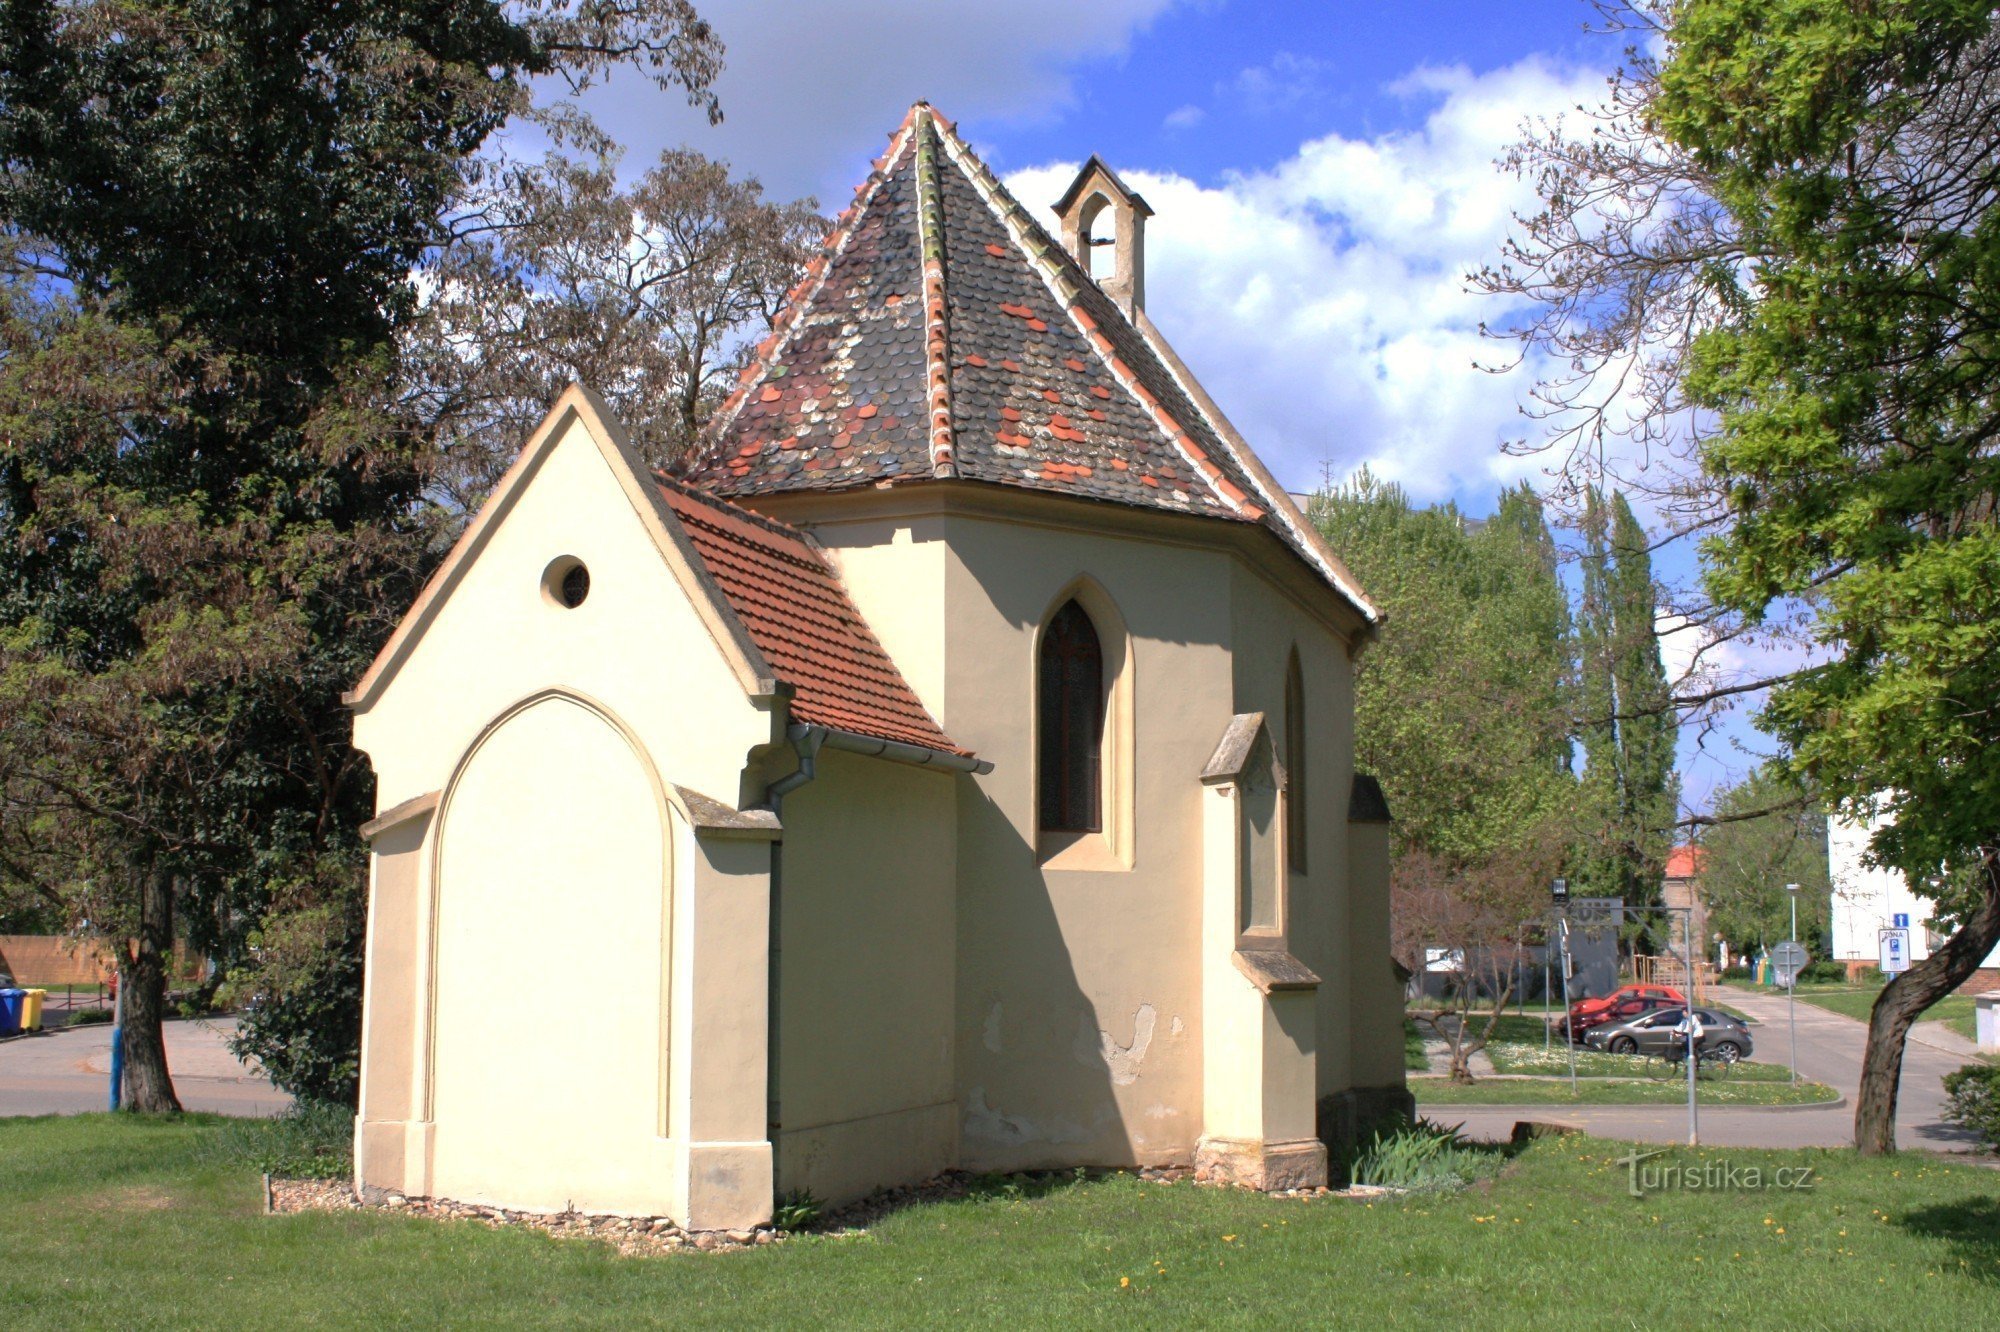 Břeclav - chapel of the Resurrection of the Lord